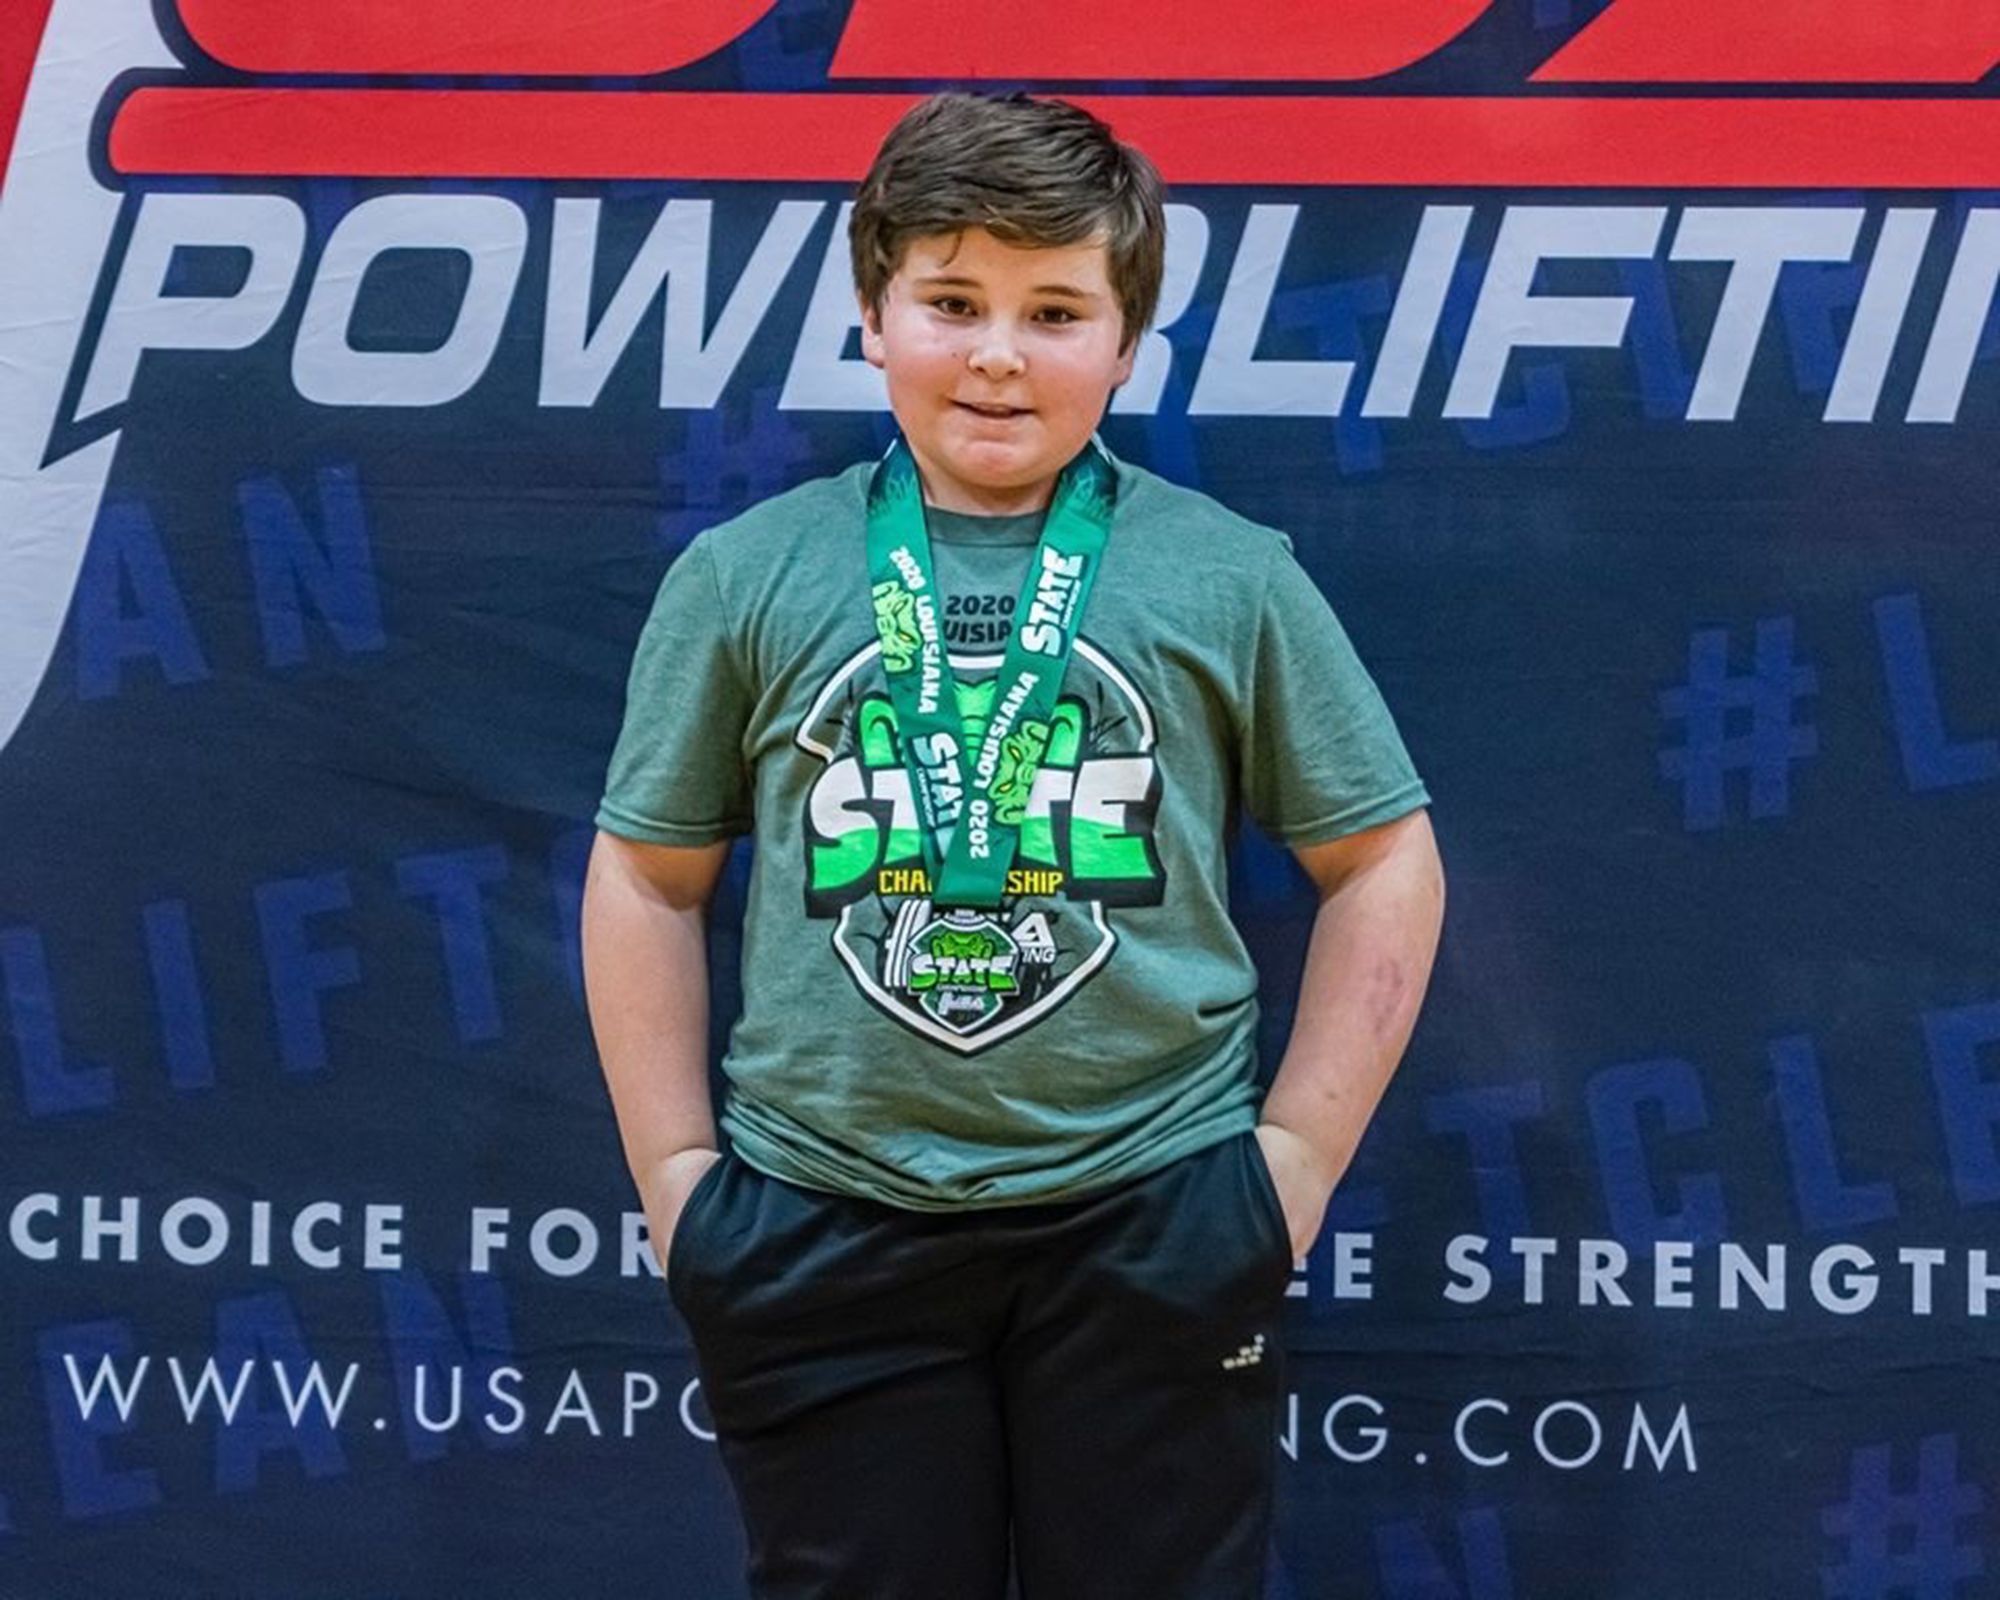 Nine-year-old weightlifter sets records, ends misconceptions